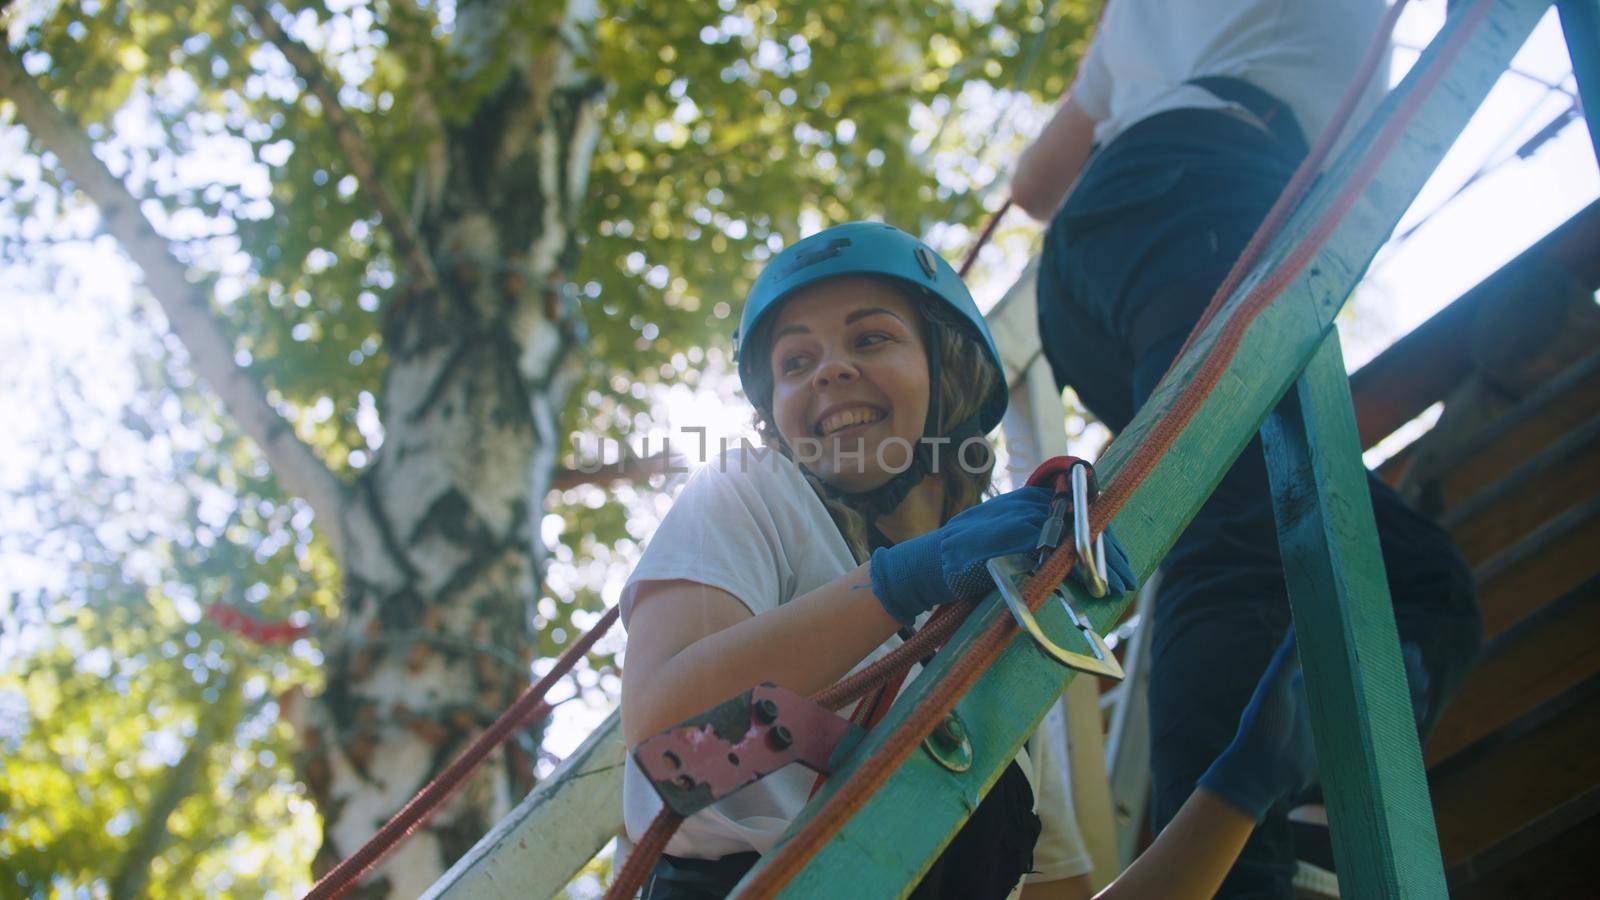 Rope adventure - couple walking upstairs to the attraction area - woman smiling by Studia72